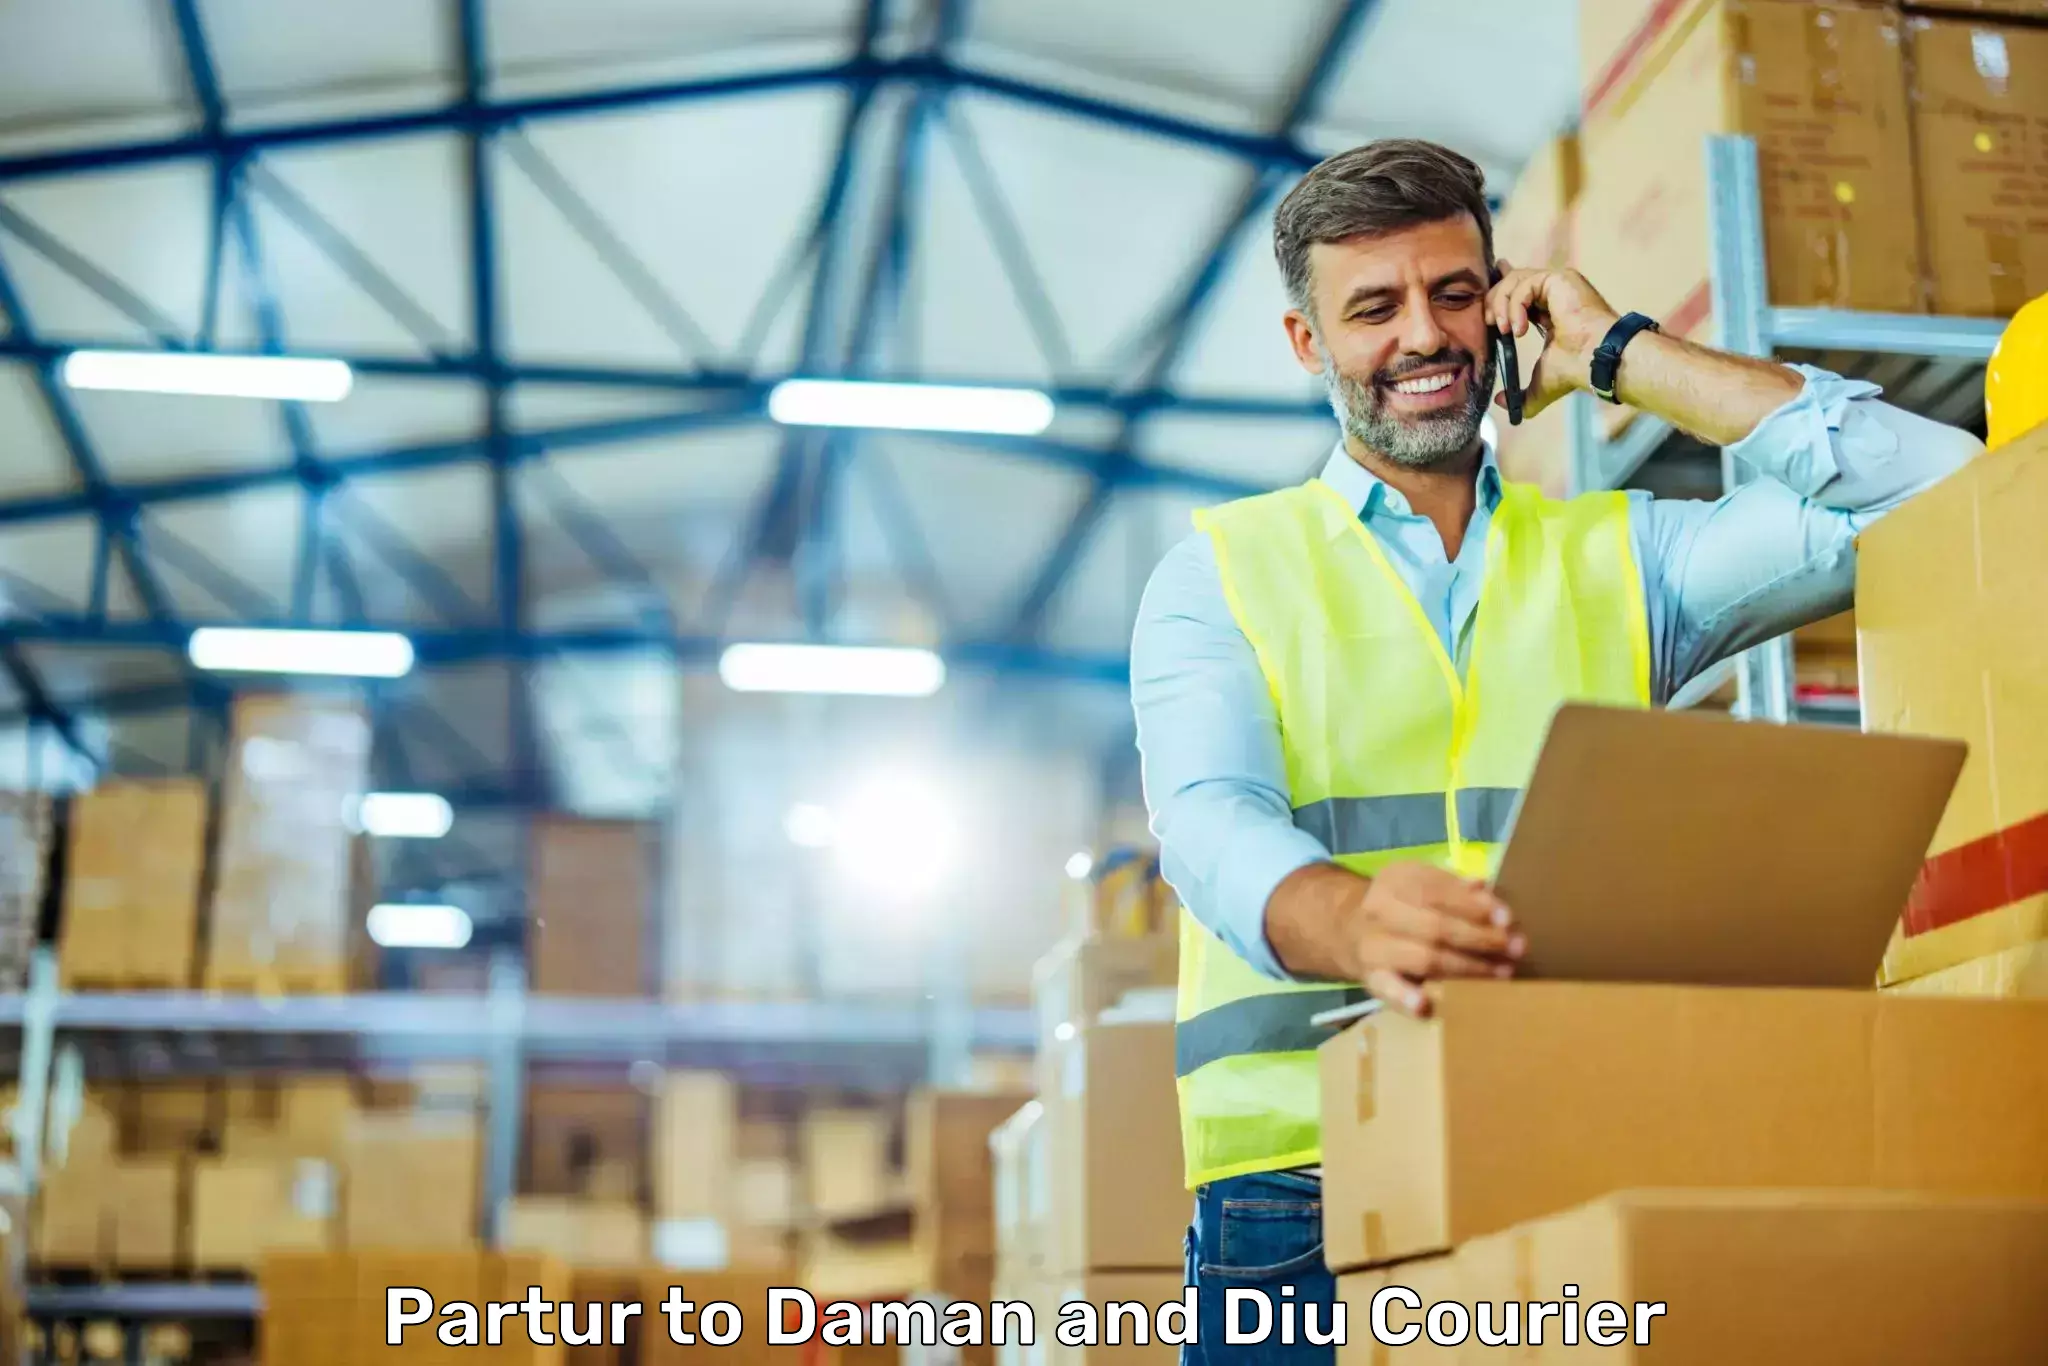 Global courier networks Partur to Daman